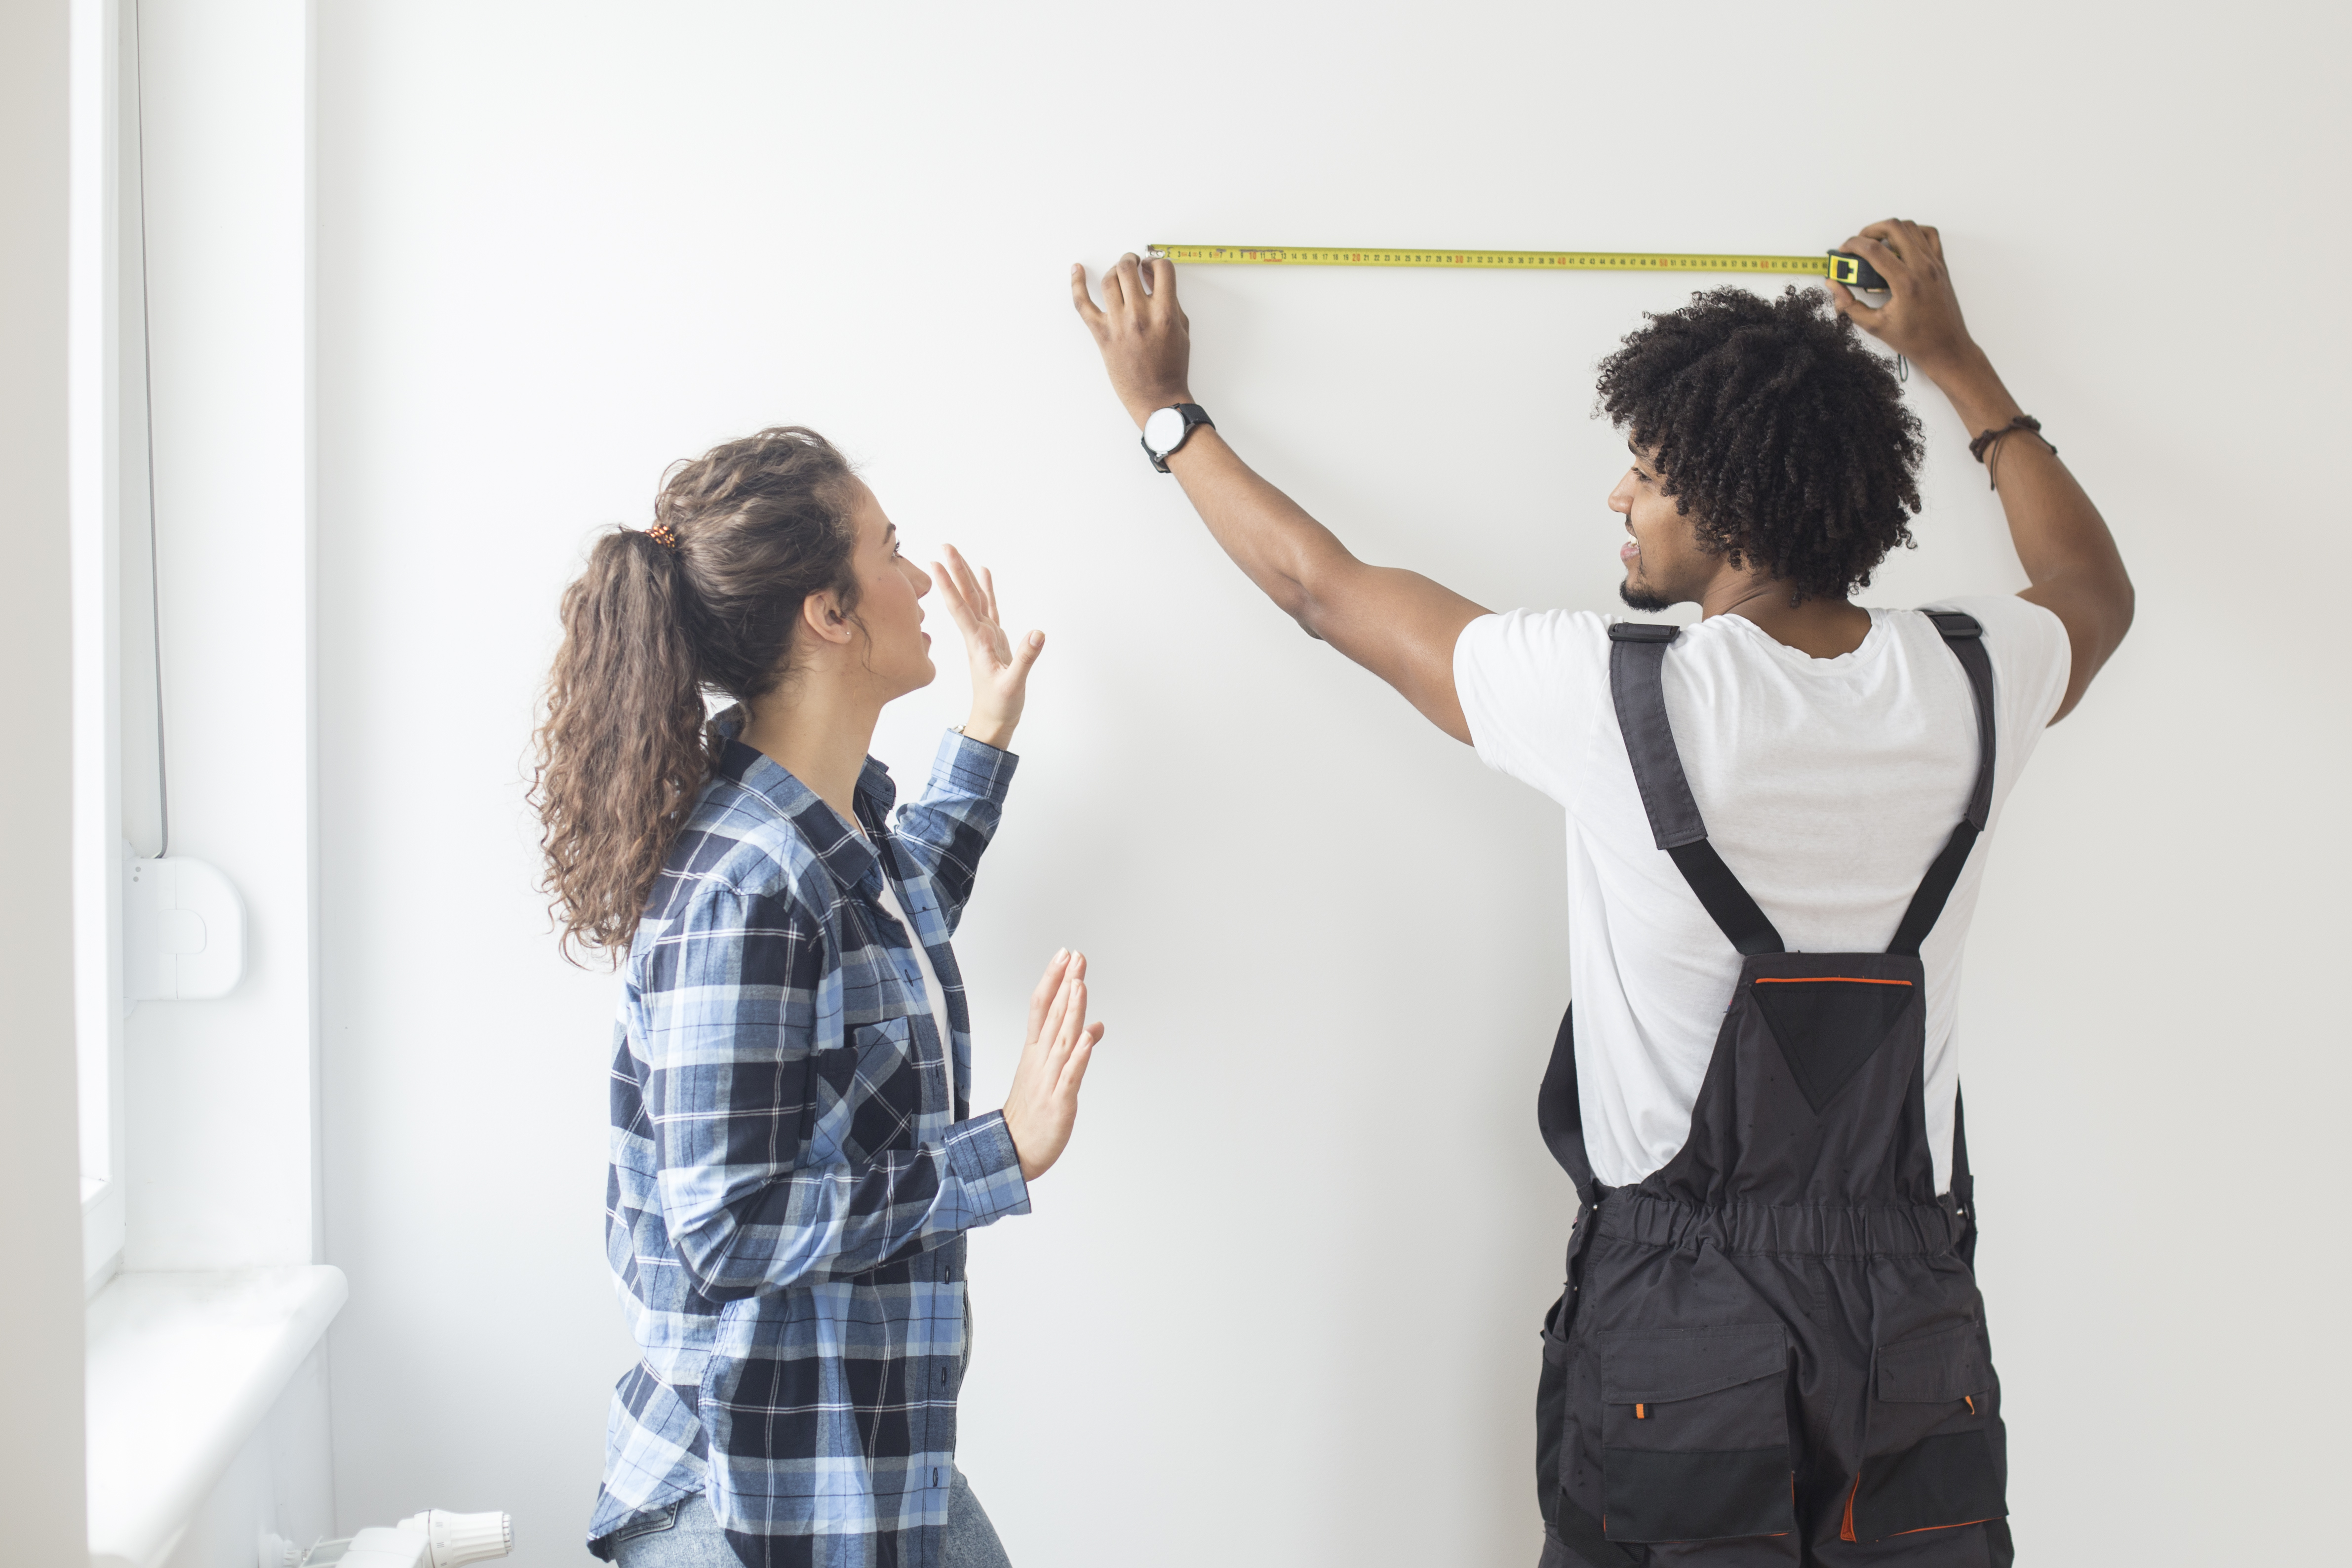 [Couple Measuring a Spot on a Wall]